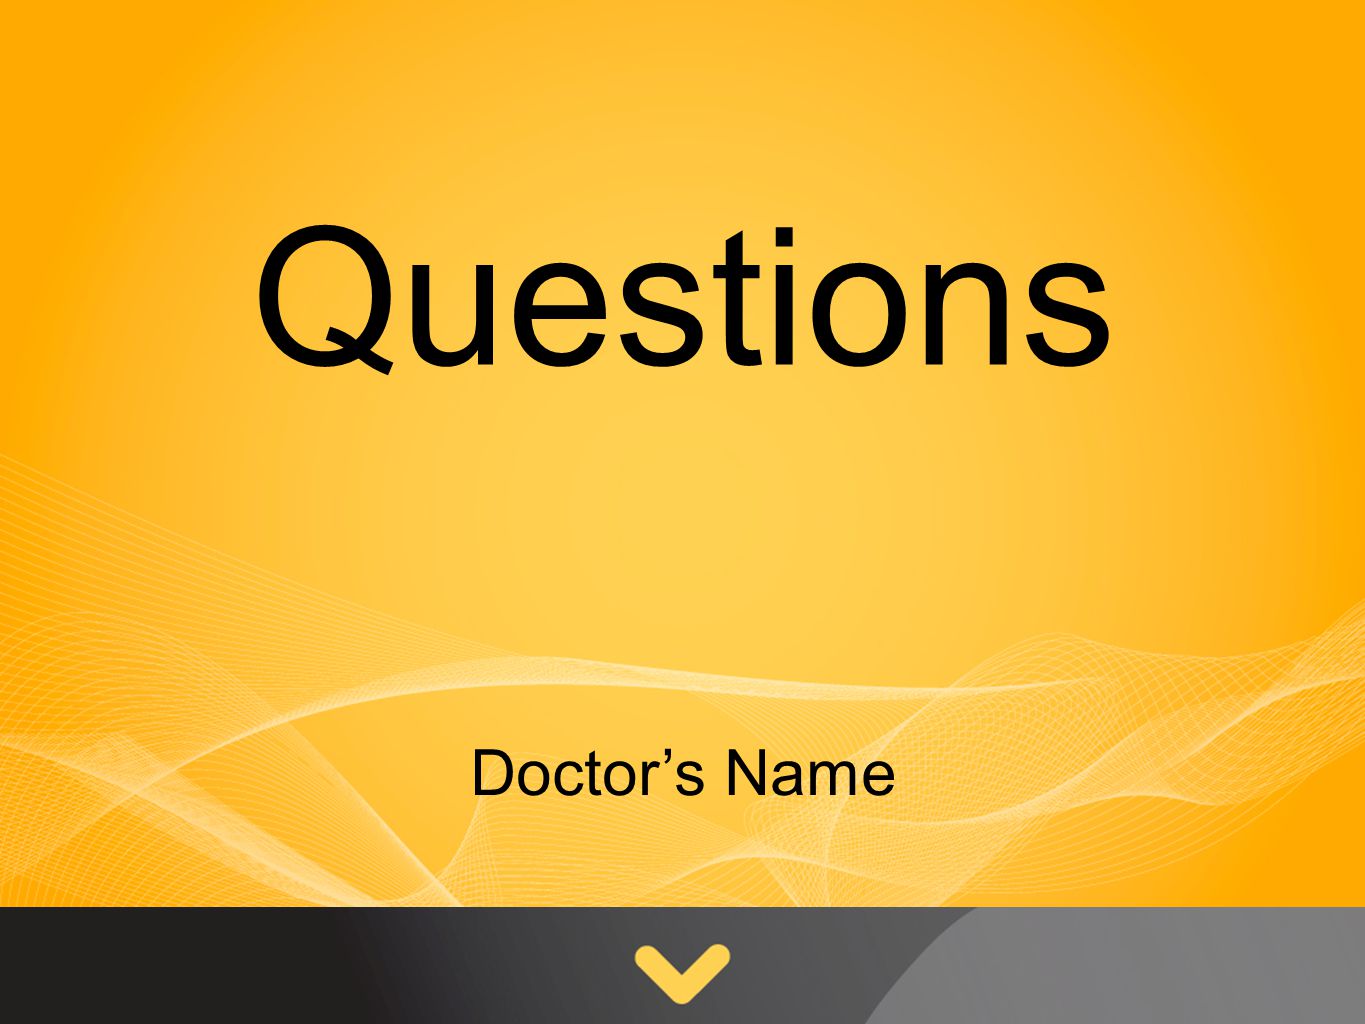 Questions Doctor’s Name